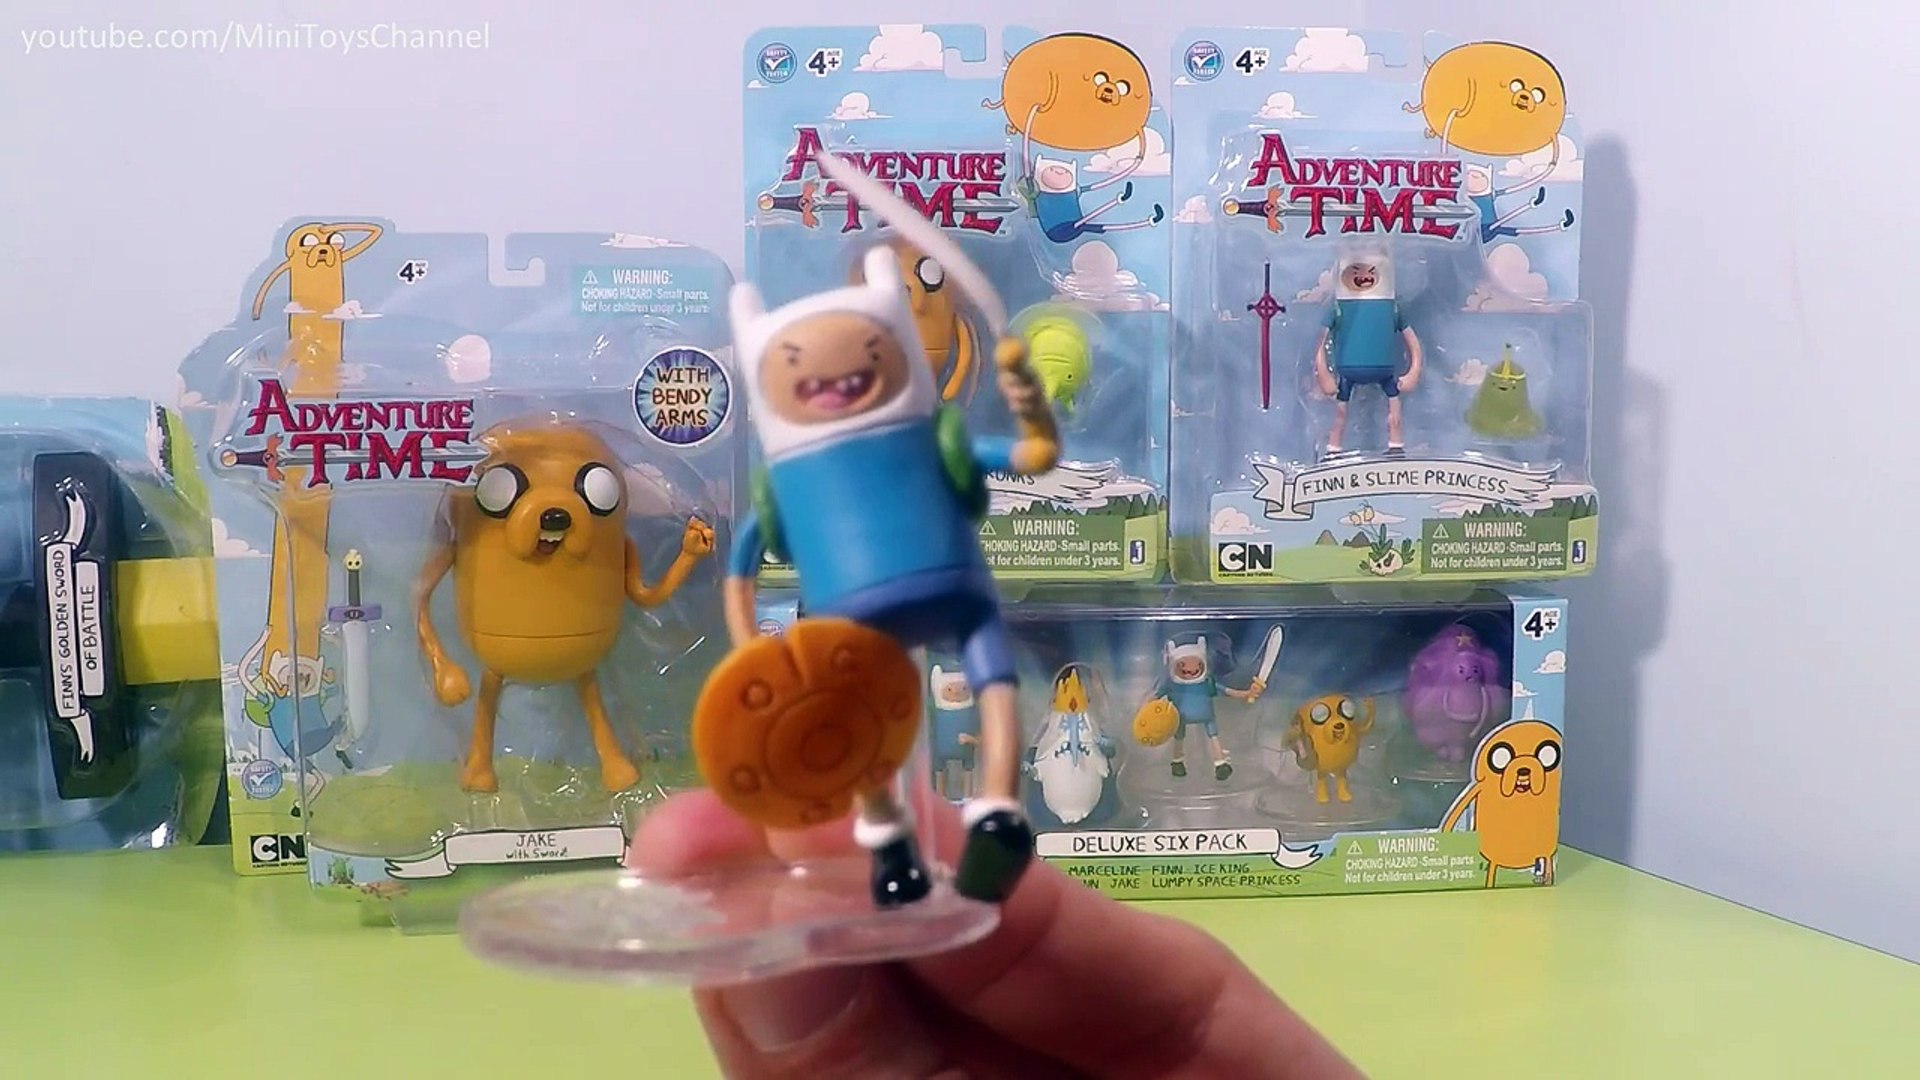 Adventure Time Toys: Finns Sword, Stretchy Jake, Mistery Figure and Deluxe  Six Pack Mini Figures - Dailymotion Video